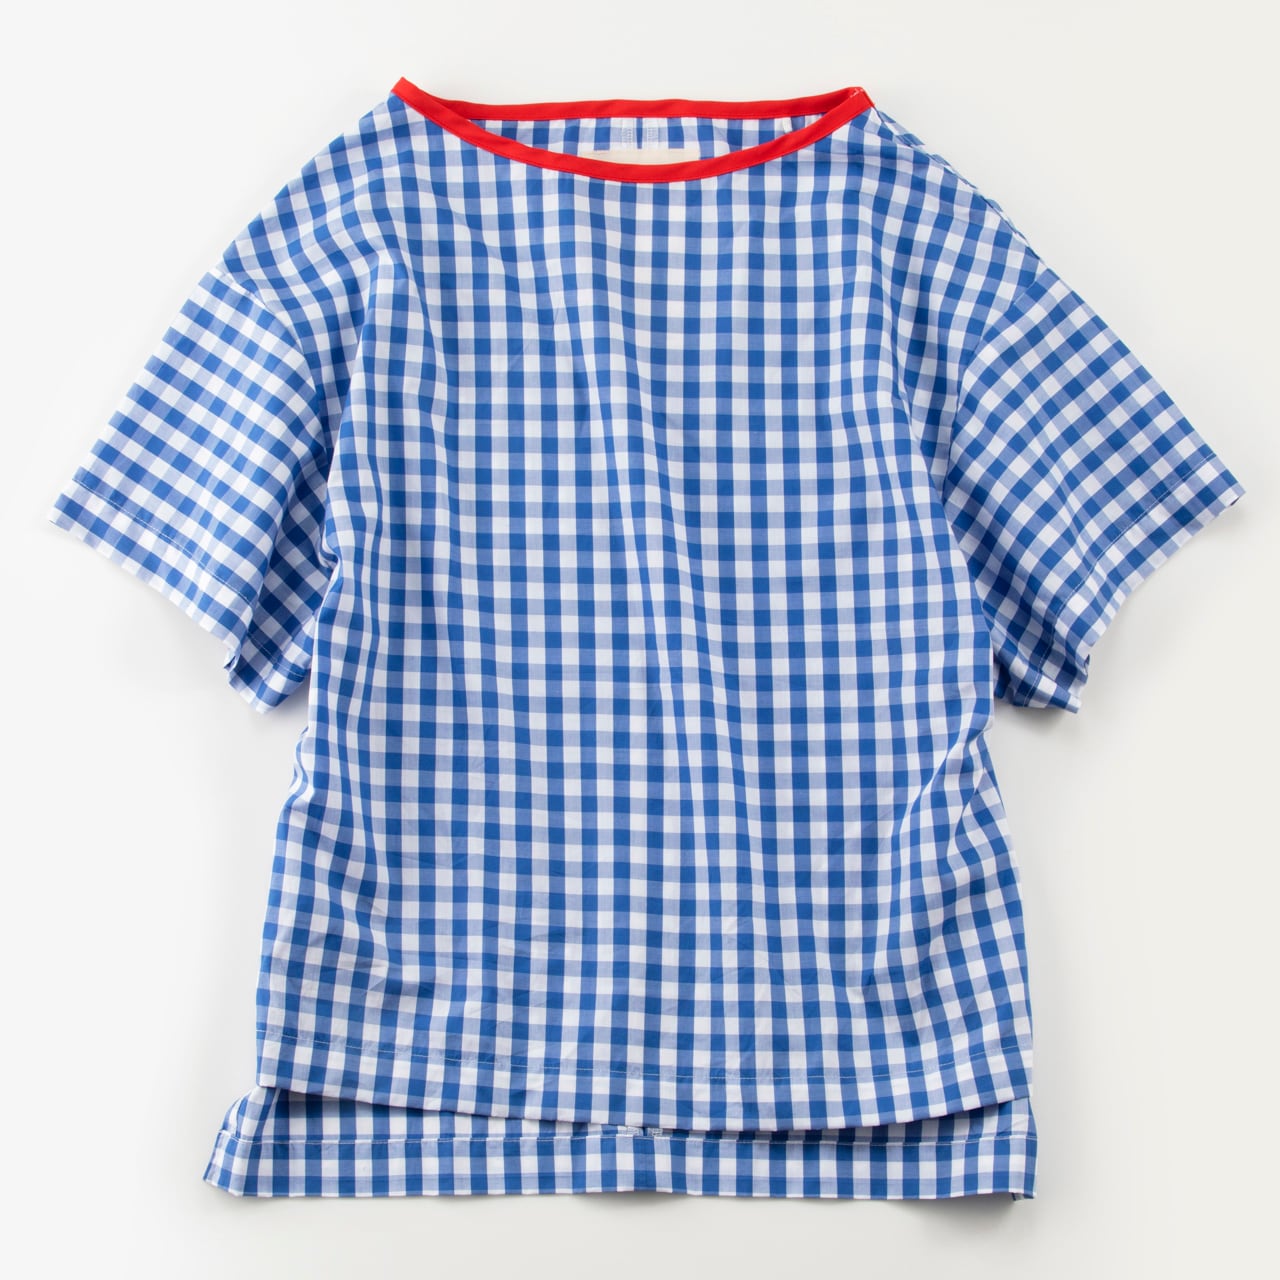 T-07｜me and bae TOPS　播州織 gingham check